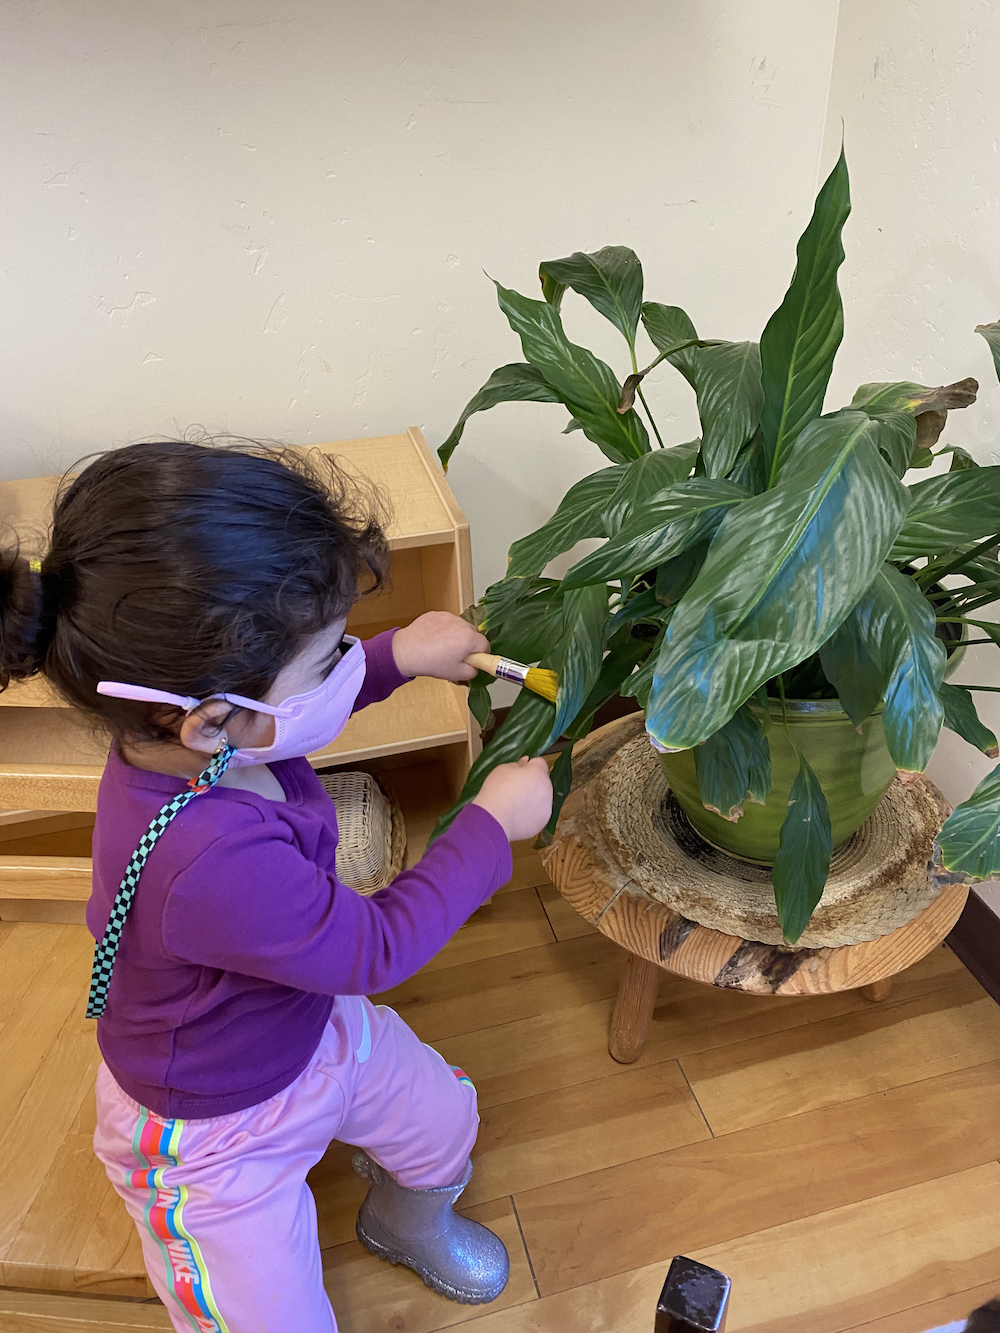 A Three Year-Old Learning How to Care for plants by cleaning and watering them